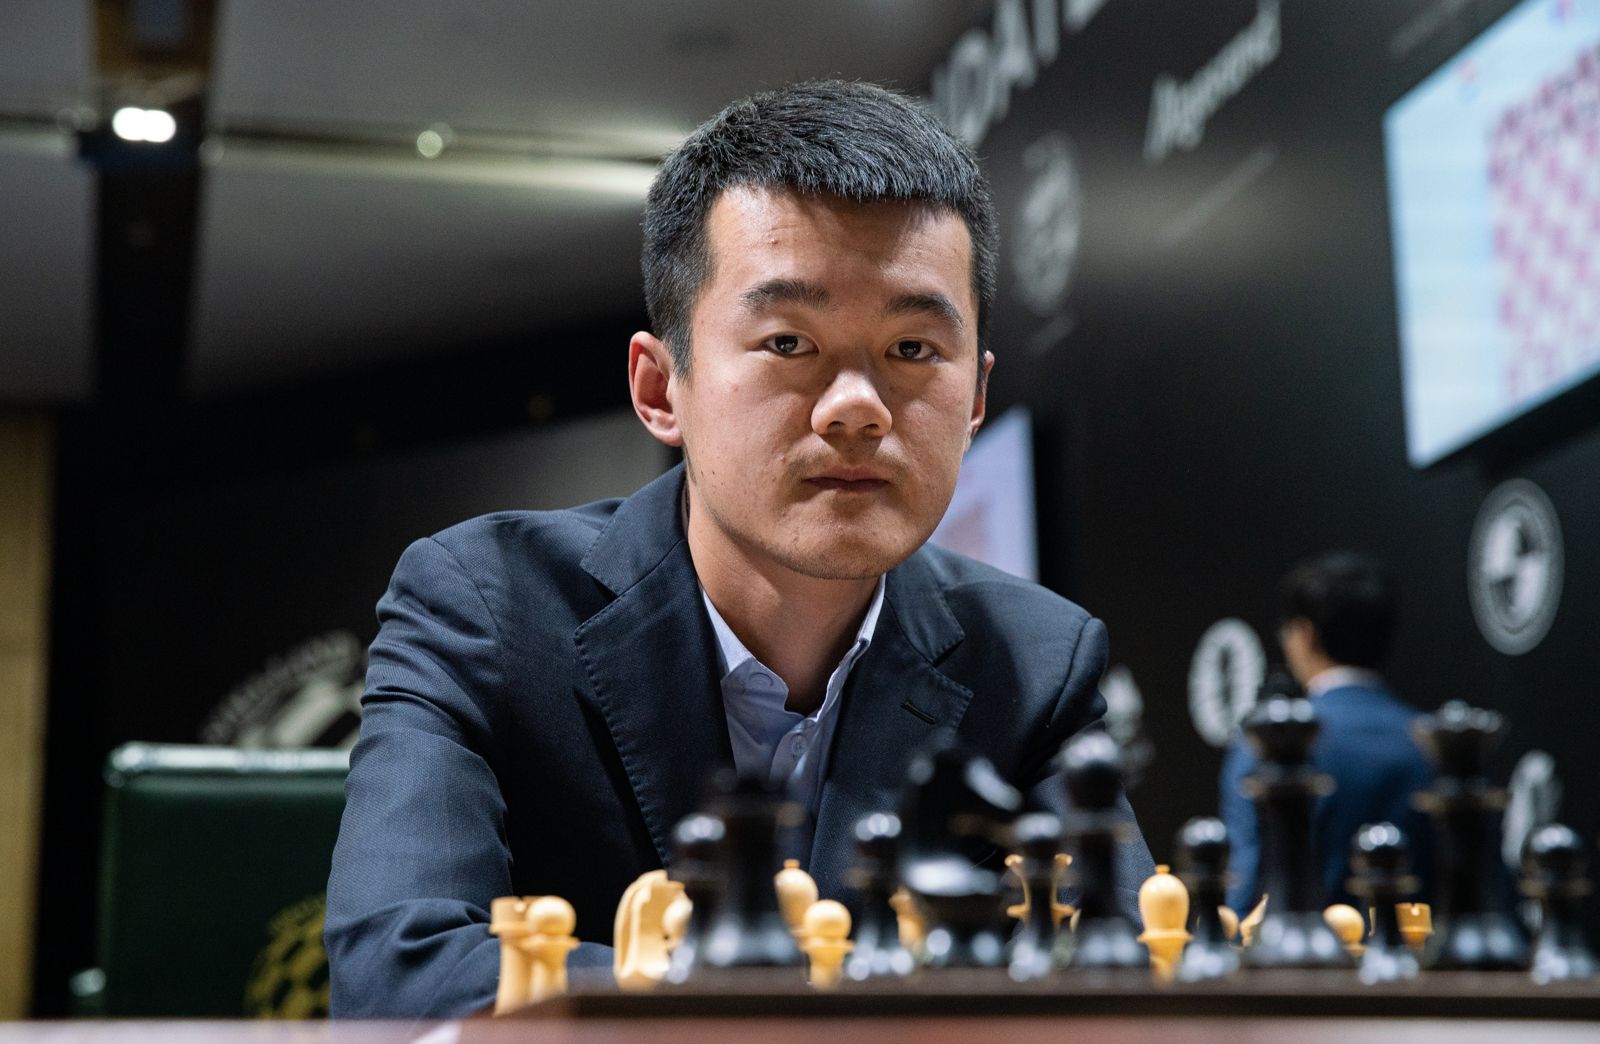 Ding Liren: My Friends Told Me I Was the Chosen One